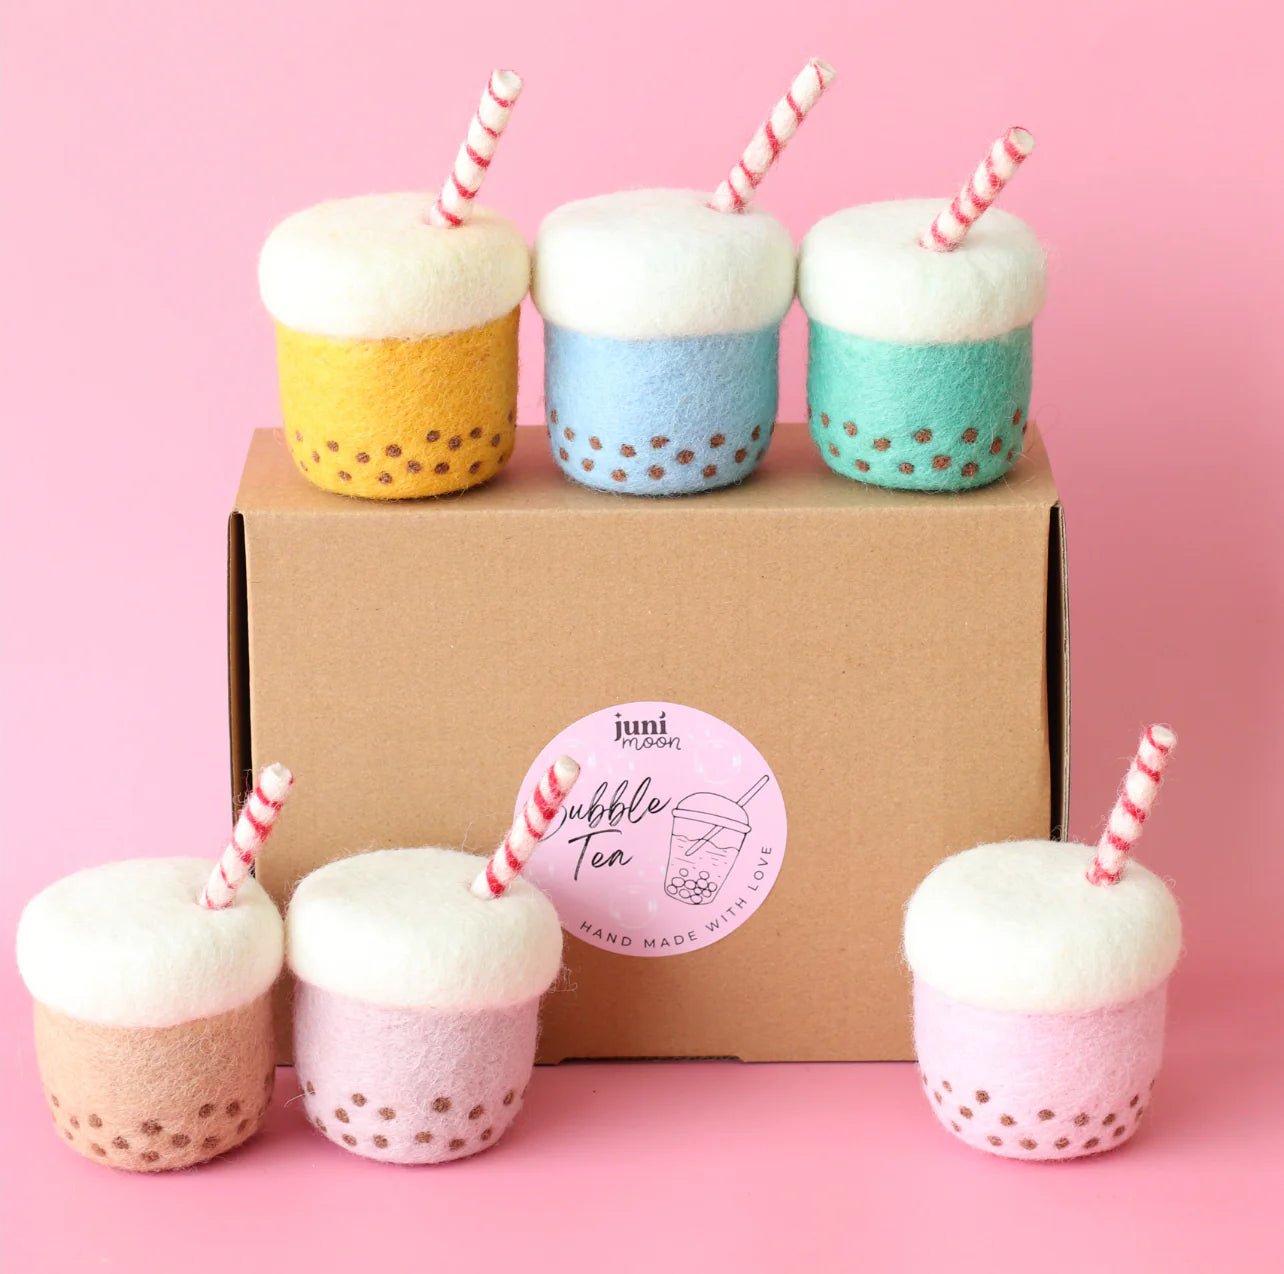 JUNI MOON | BUBBLE TEA - 6 FLAVOURS Strawberry by JUNI MOON - The Playful Collective